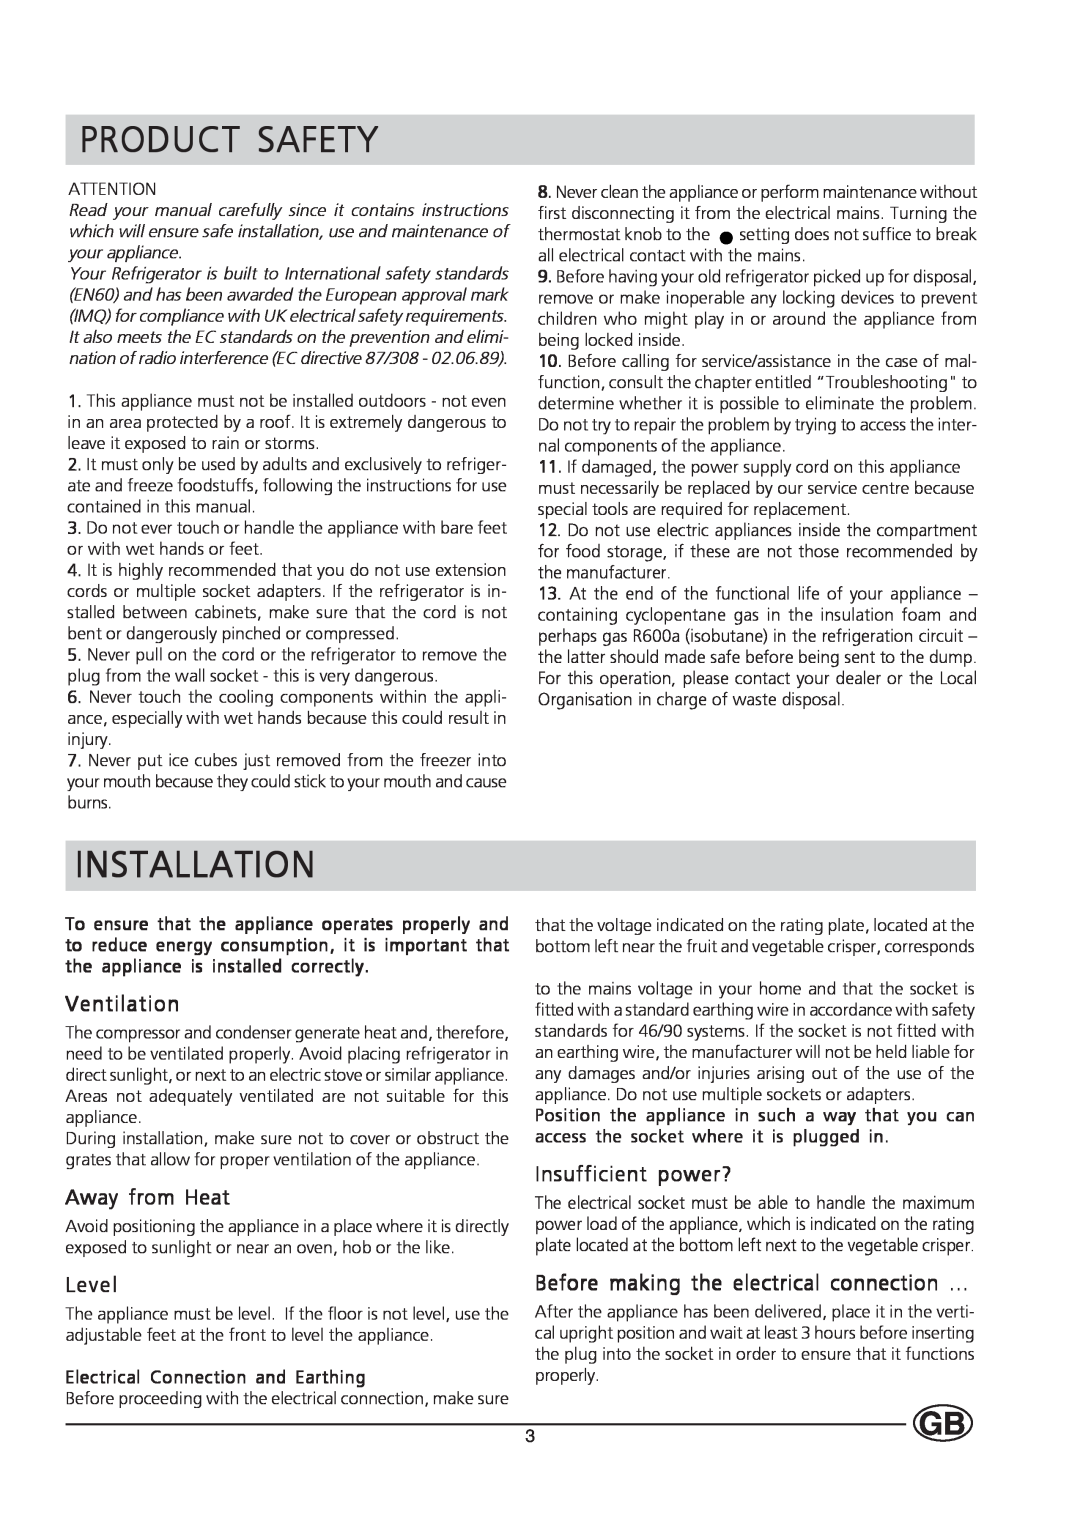 Hotpoint HT303 manual Product Safety, Installation, Ventilation, Away from Heat, Insufficient power?, Level 